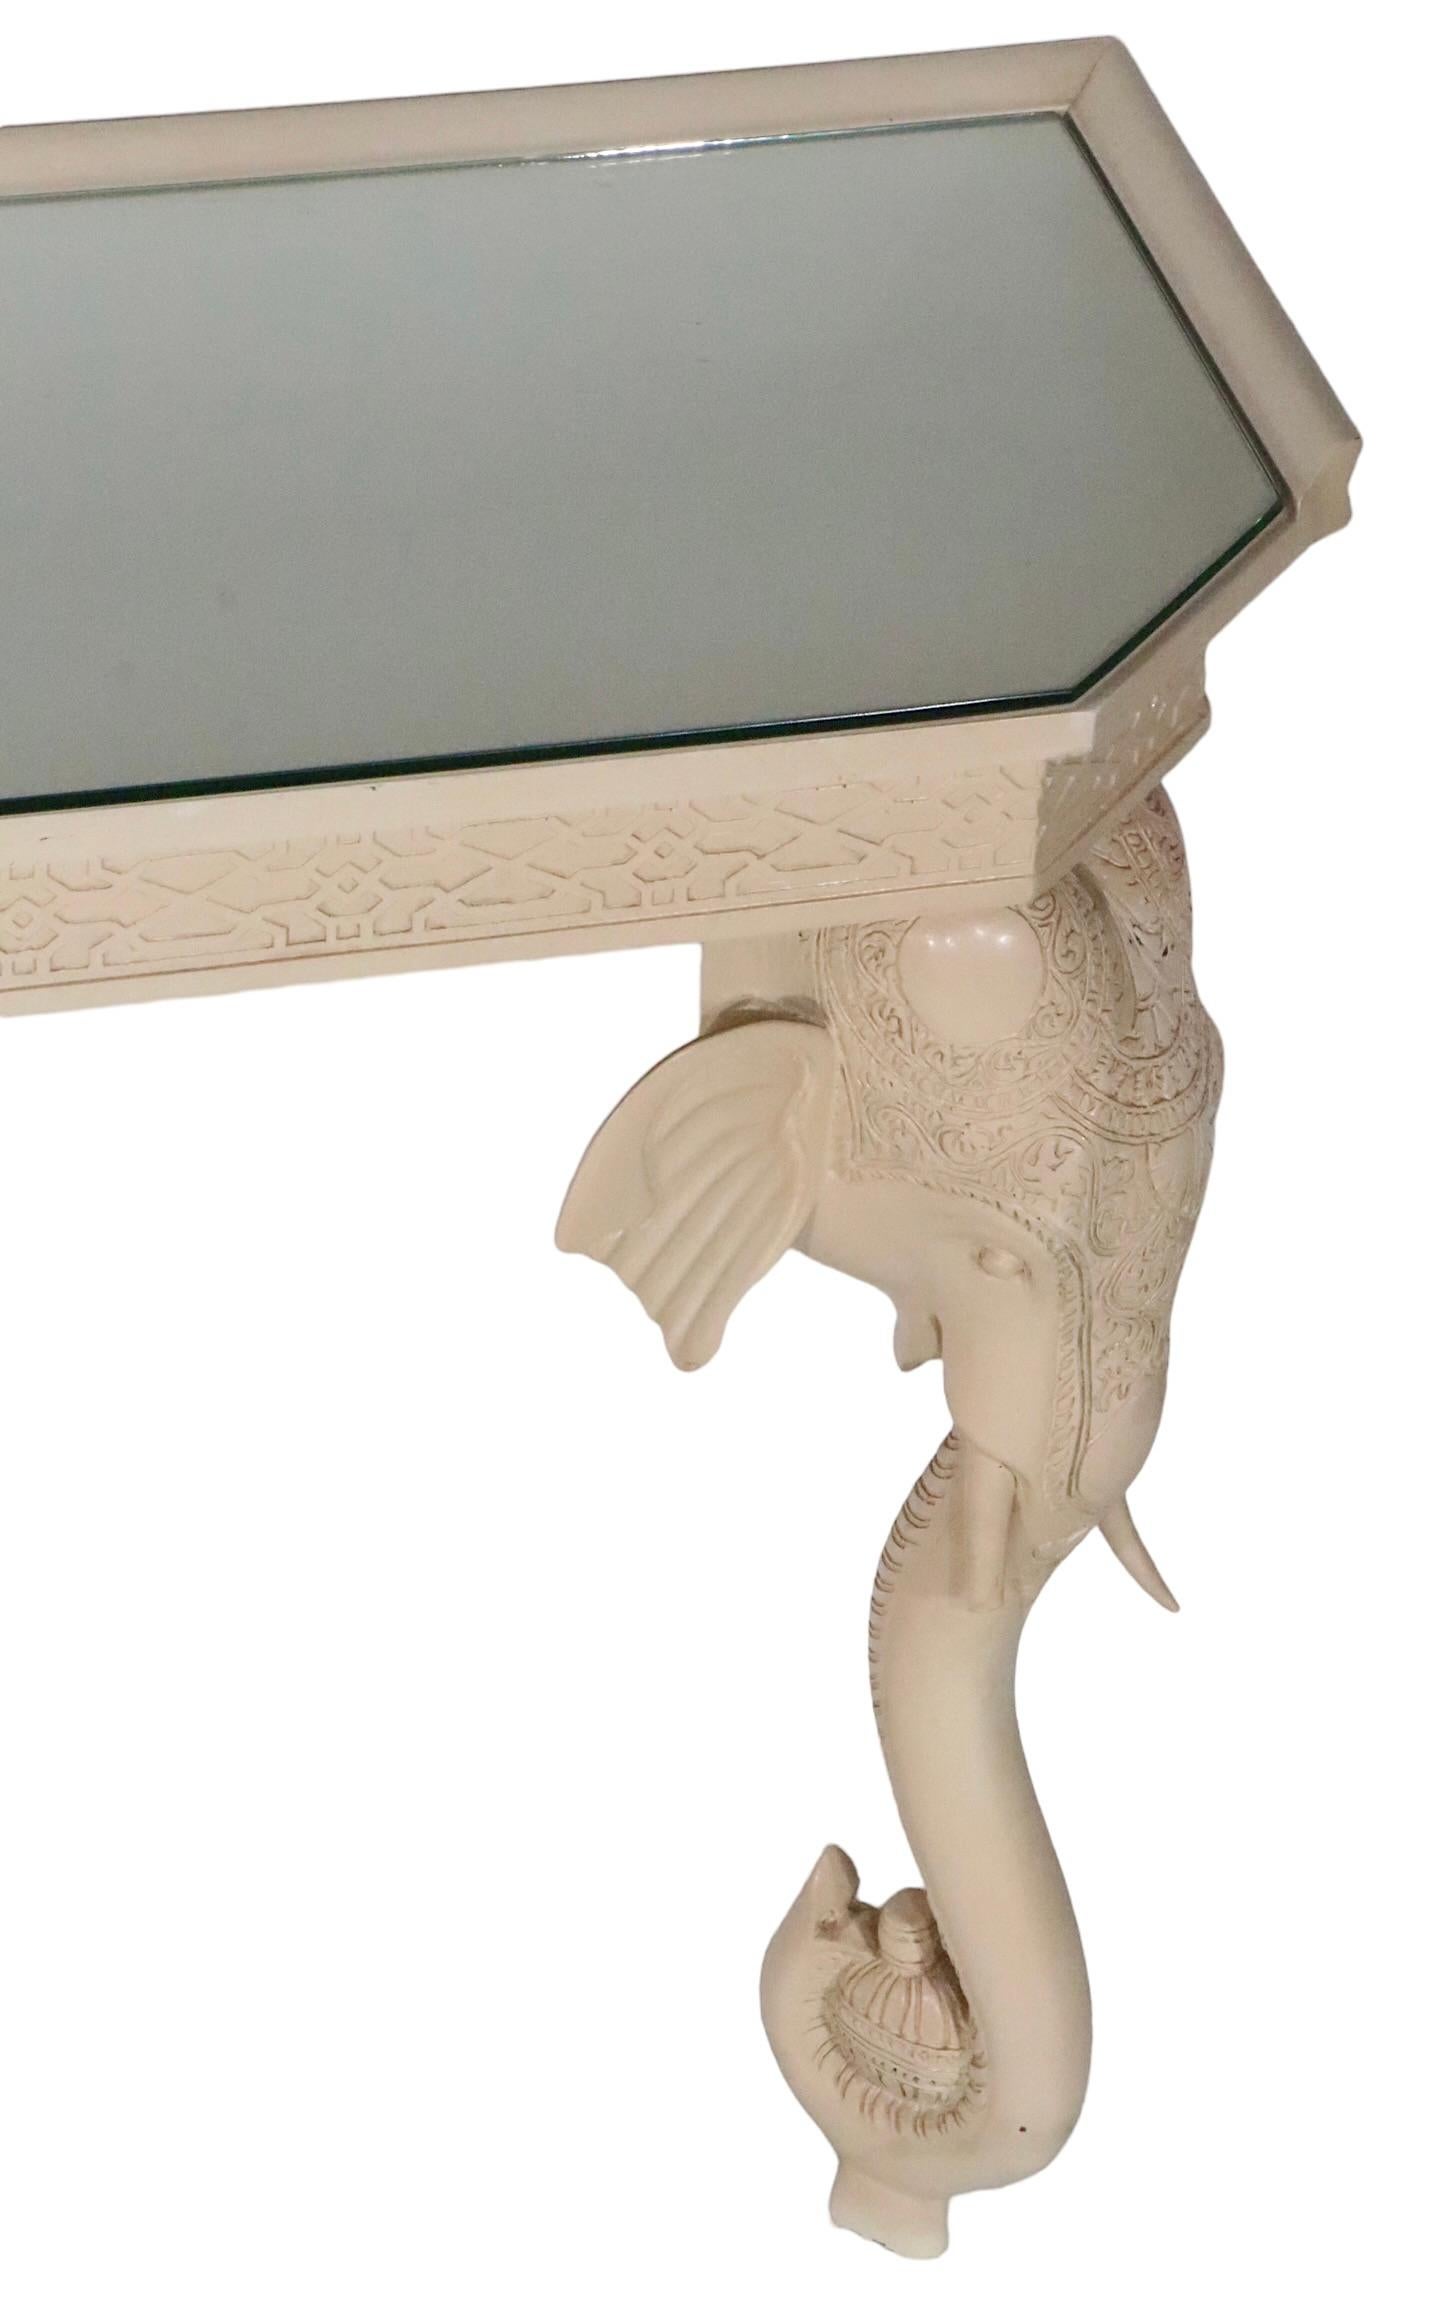 American Hollywood Regency Elephant Console att. to Gampel Stoll  For Sale